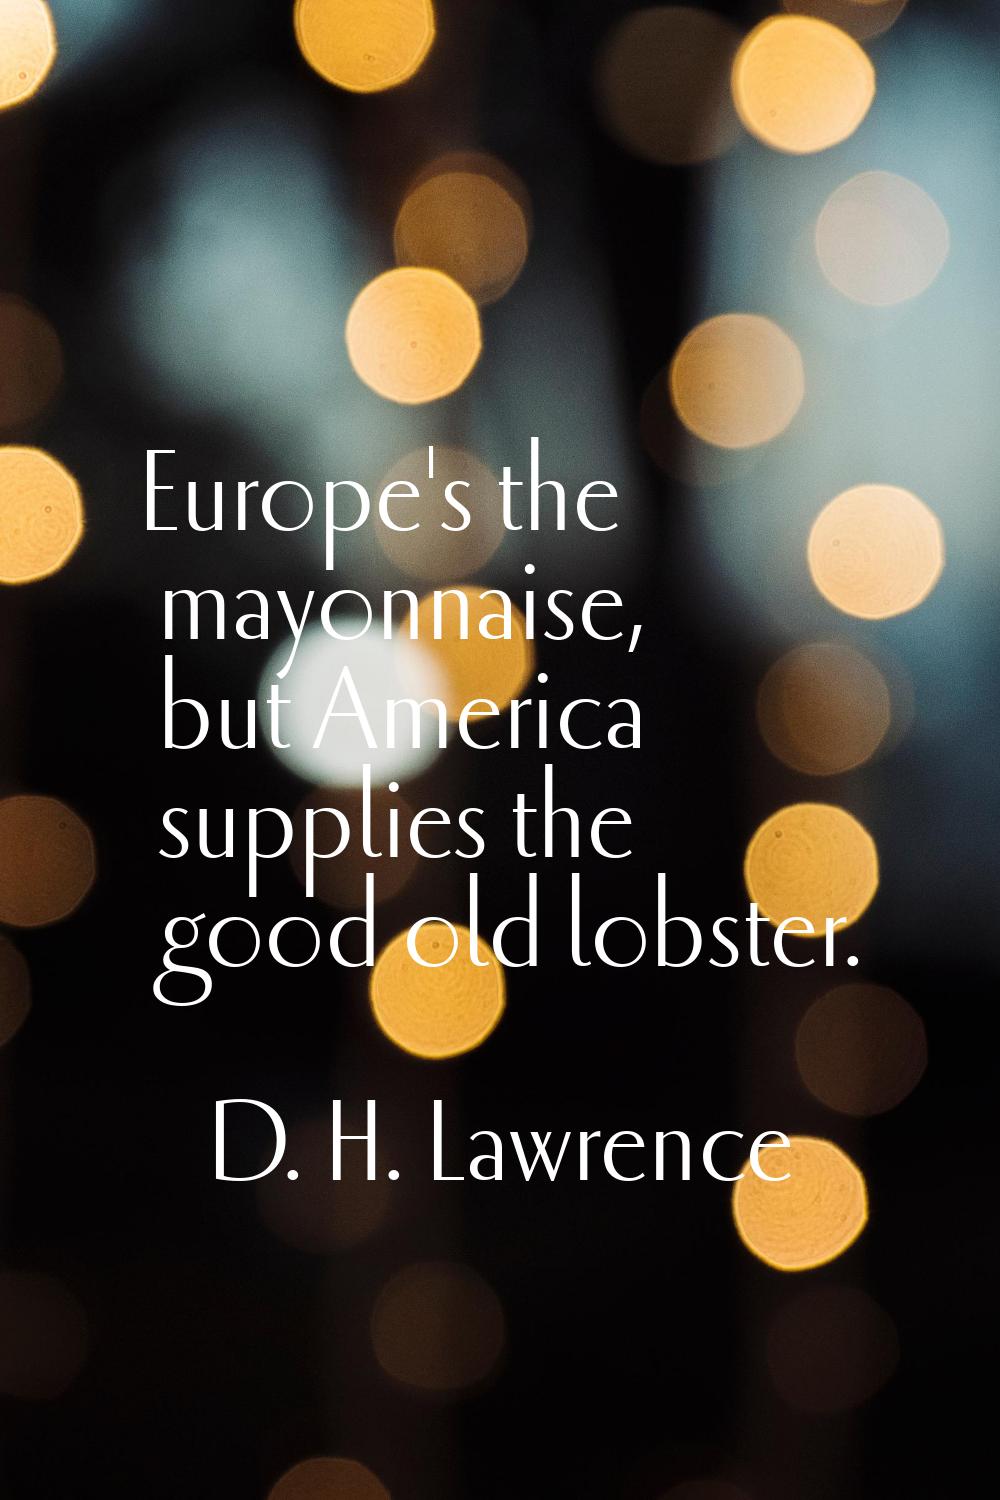 Europe's the mayonnaise, but America supplies the good old lobster.